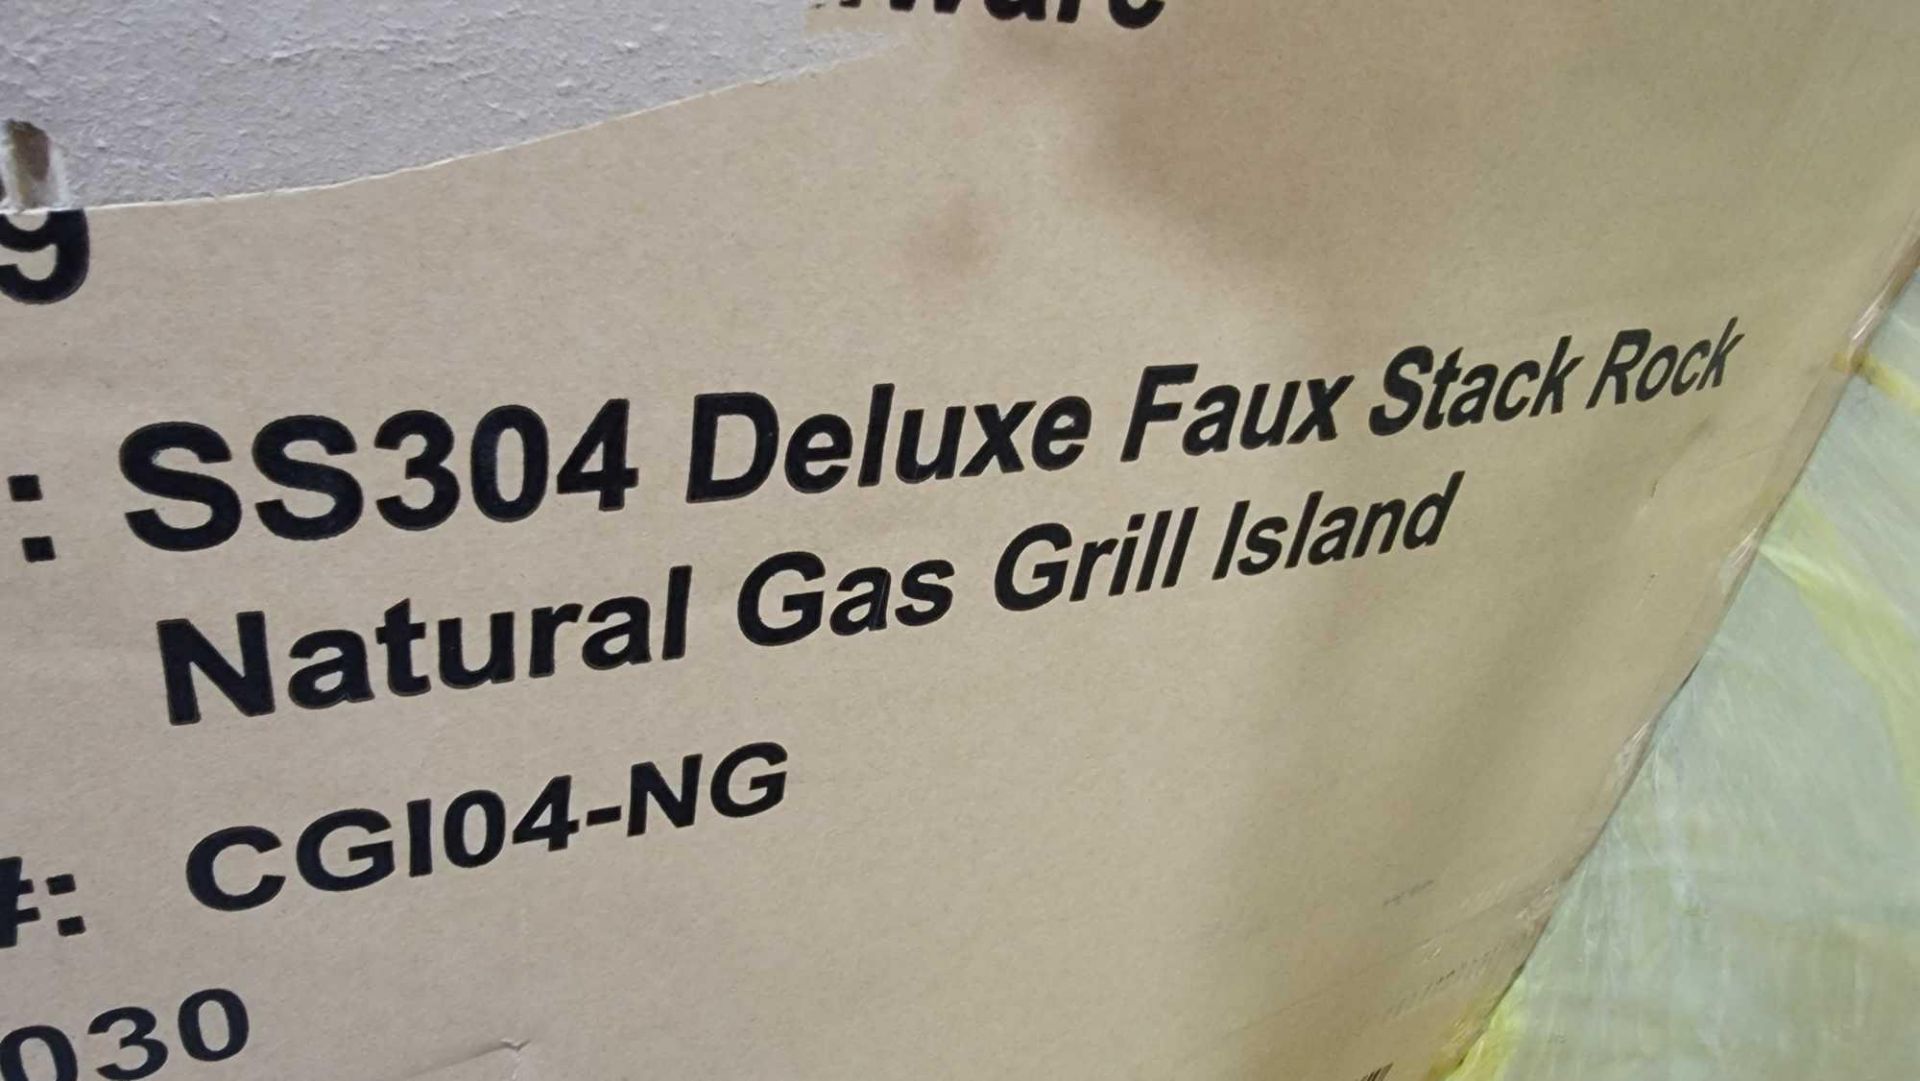 Natural Gas Grill Island - Image 3 of 12